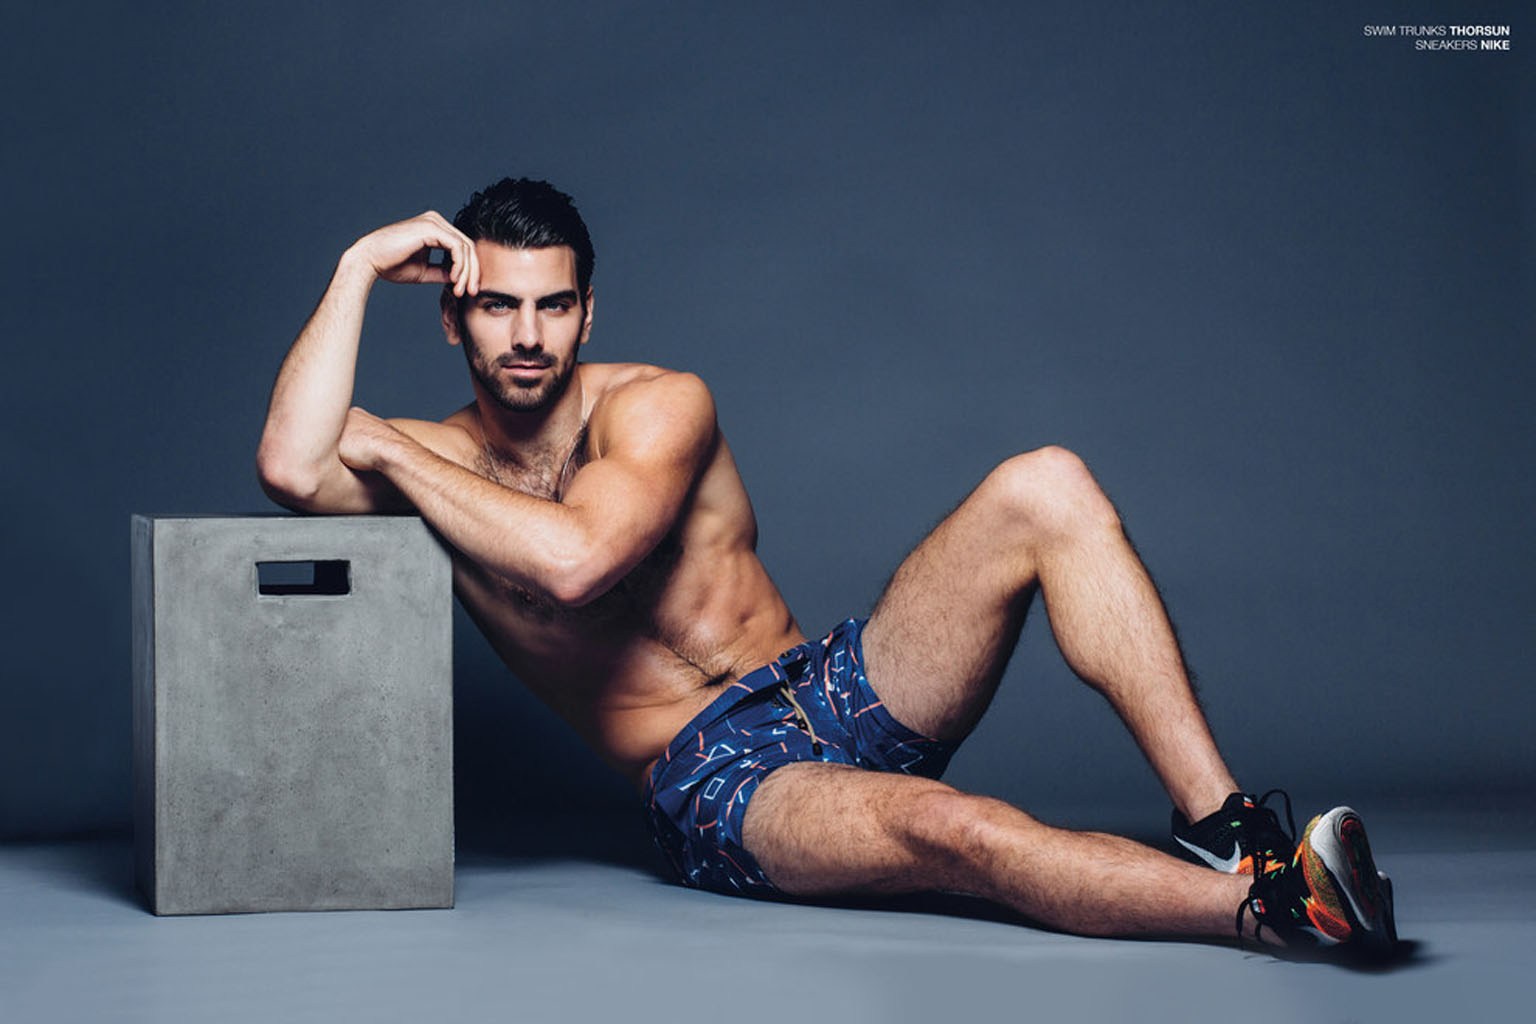 Nyle DiMarco Links Up with BuzzFeed for New Shoot